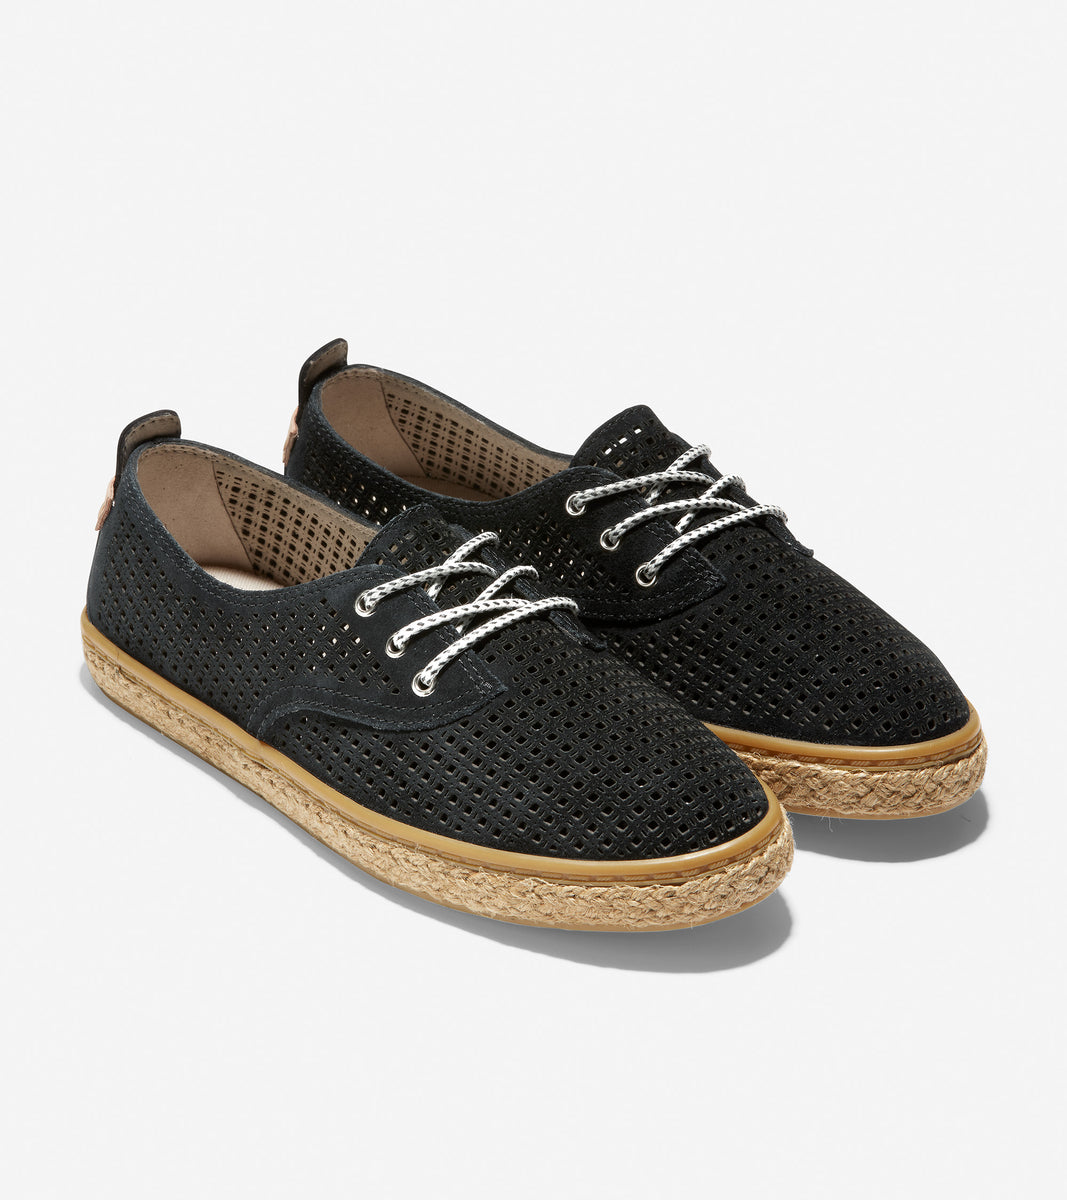 ColeHaan-Cloudfeel Lace Up Espadrille-w18372-Black Suede